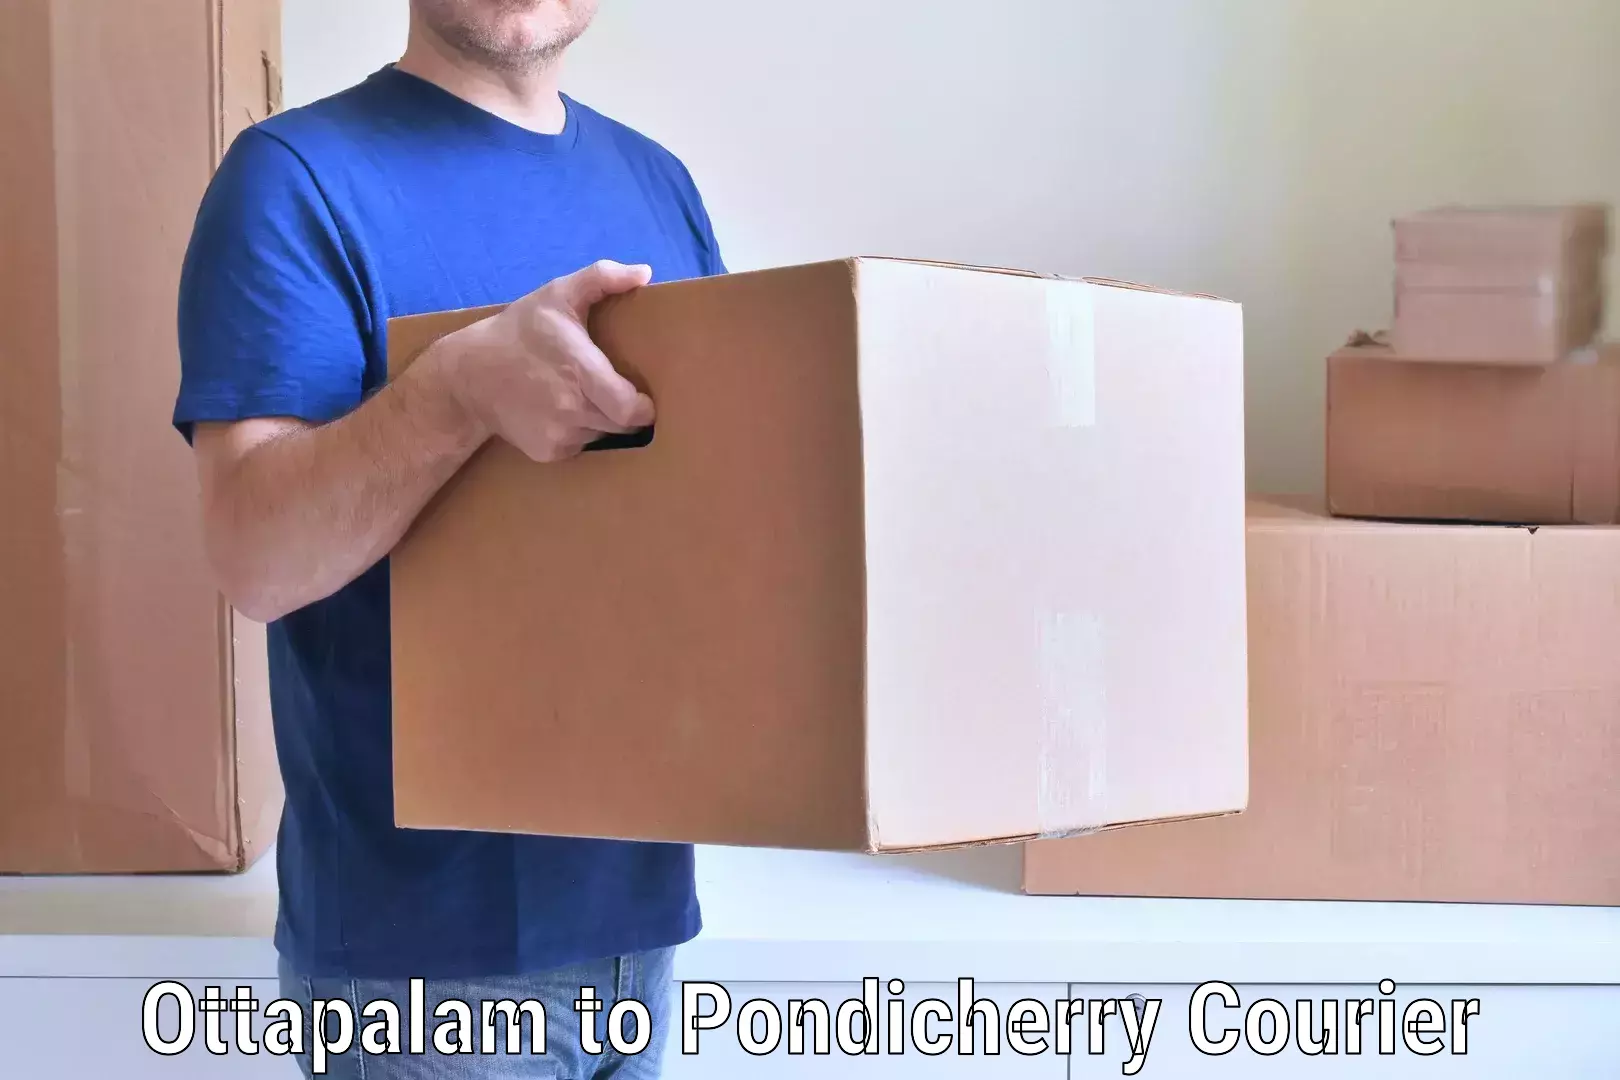 Quality moving services Ottapalam to Pondicherry